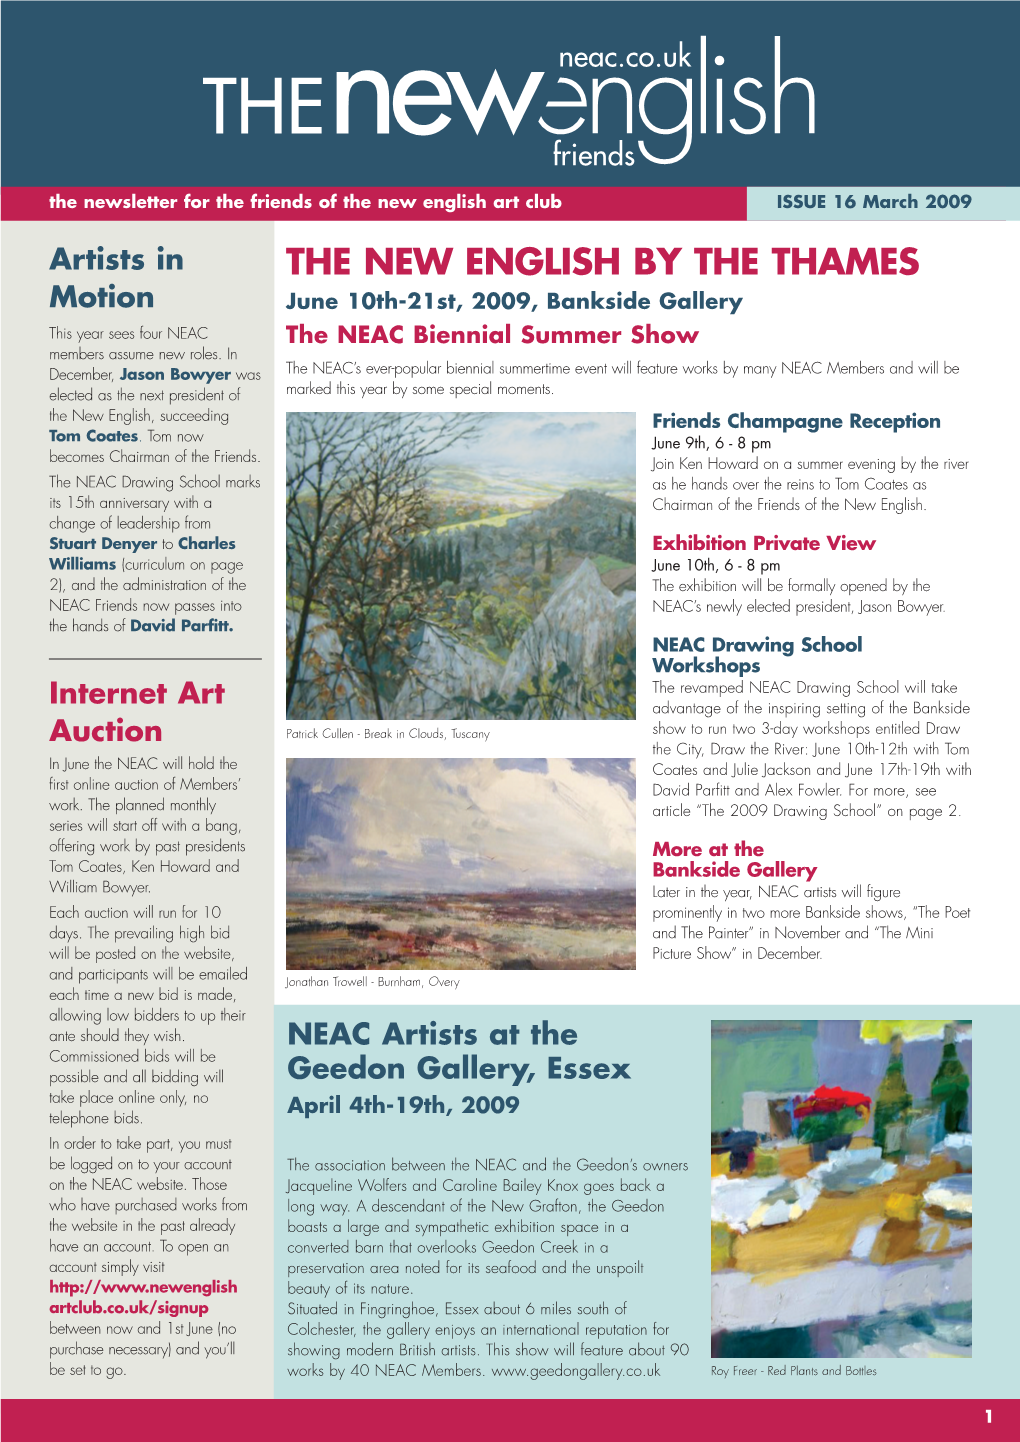 Newsletter for the Friends of the New English Art Club ISSUE 16 March 2009